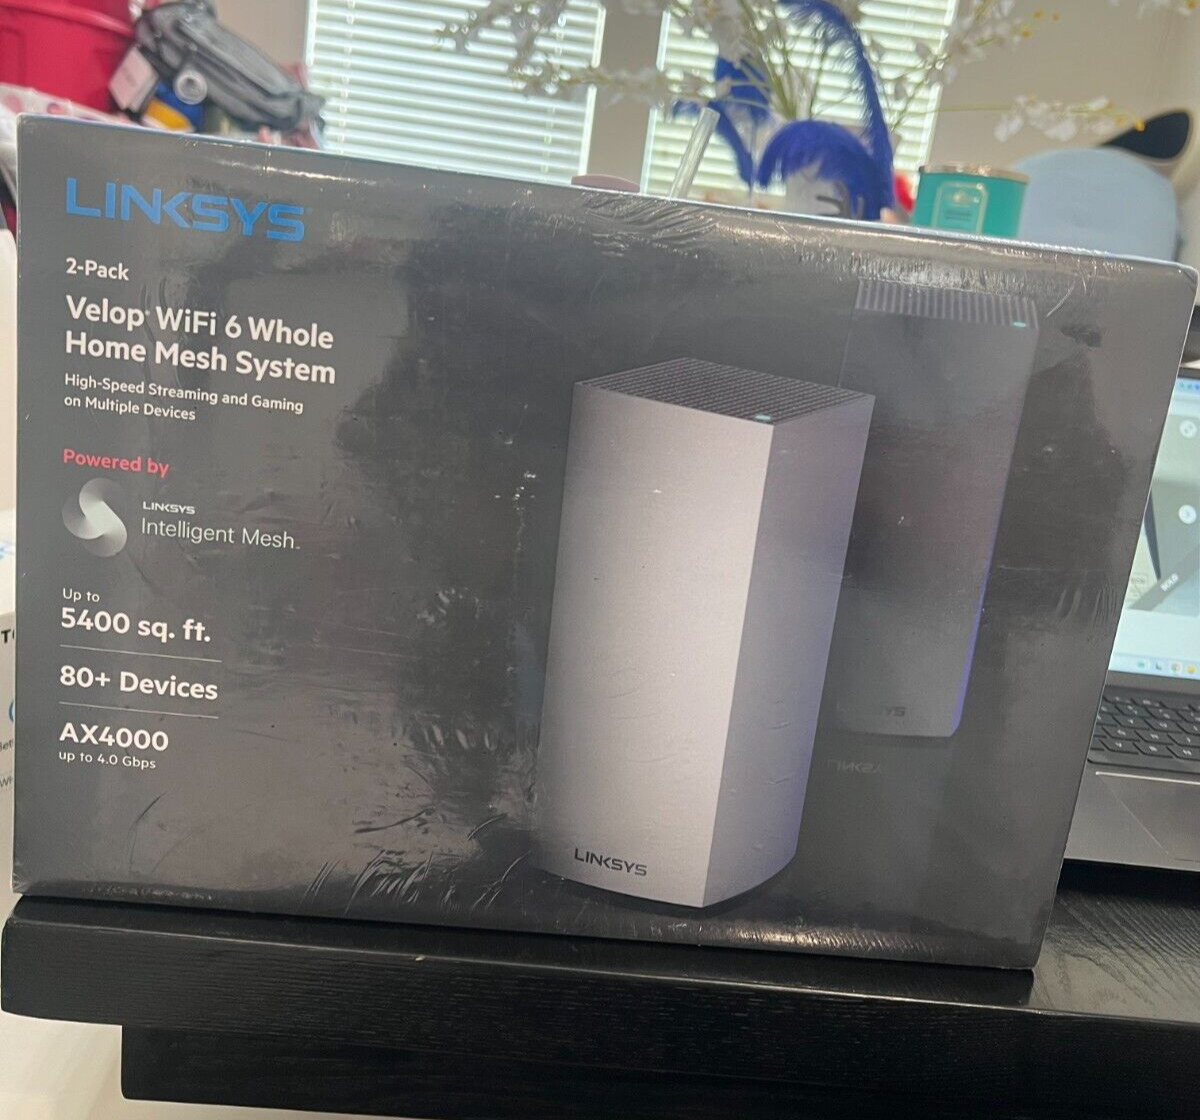 Linksys AX4000 Velop Mesh WiFi 6 System, Router Replacement Tri-Band Wireless